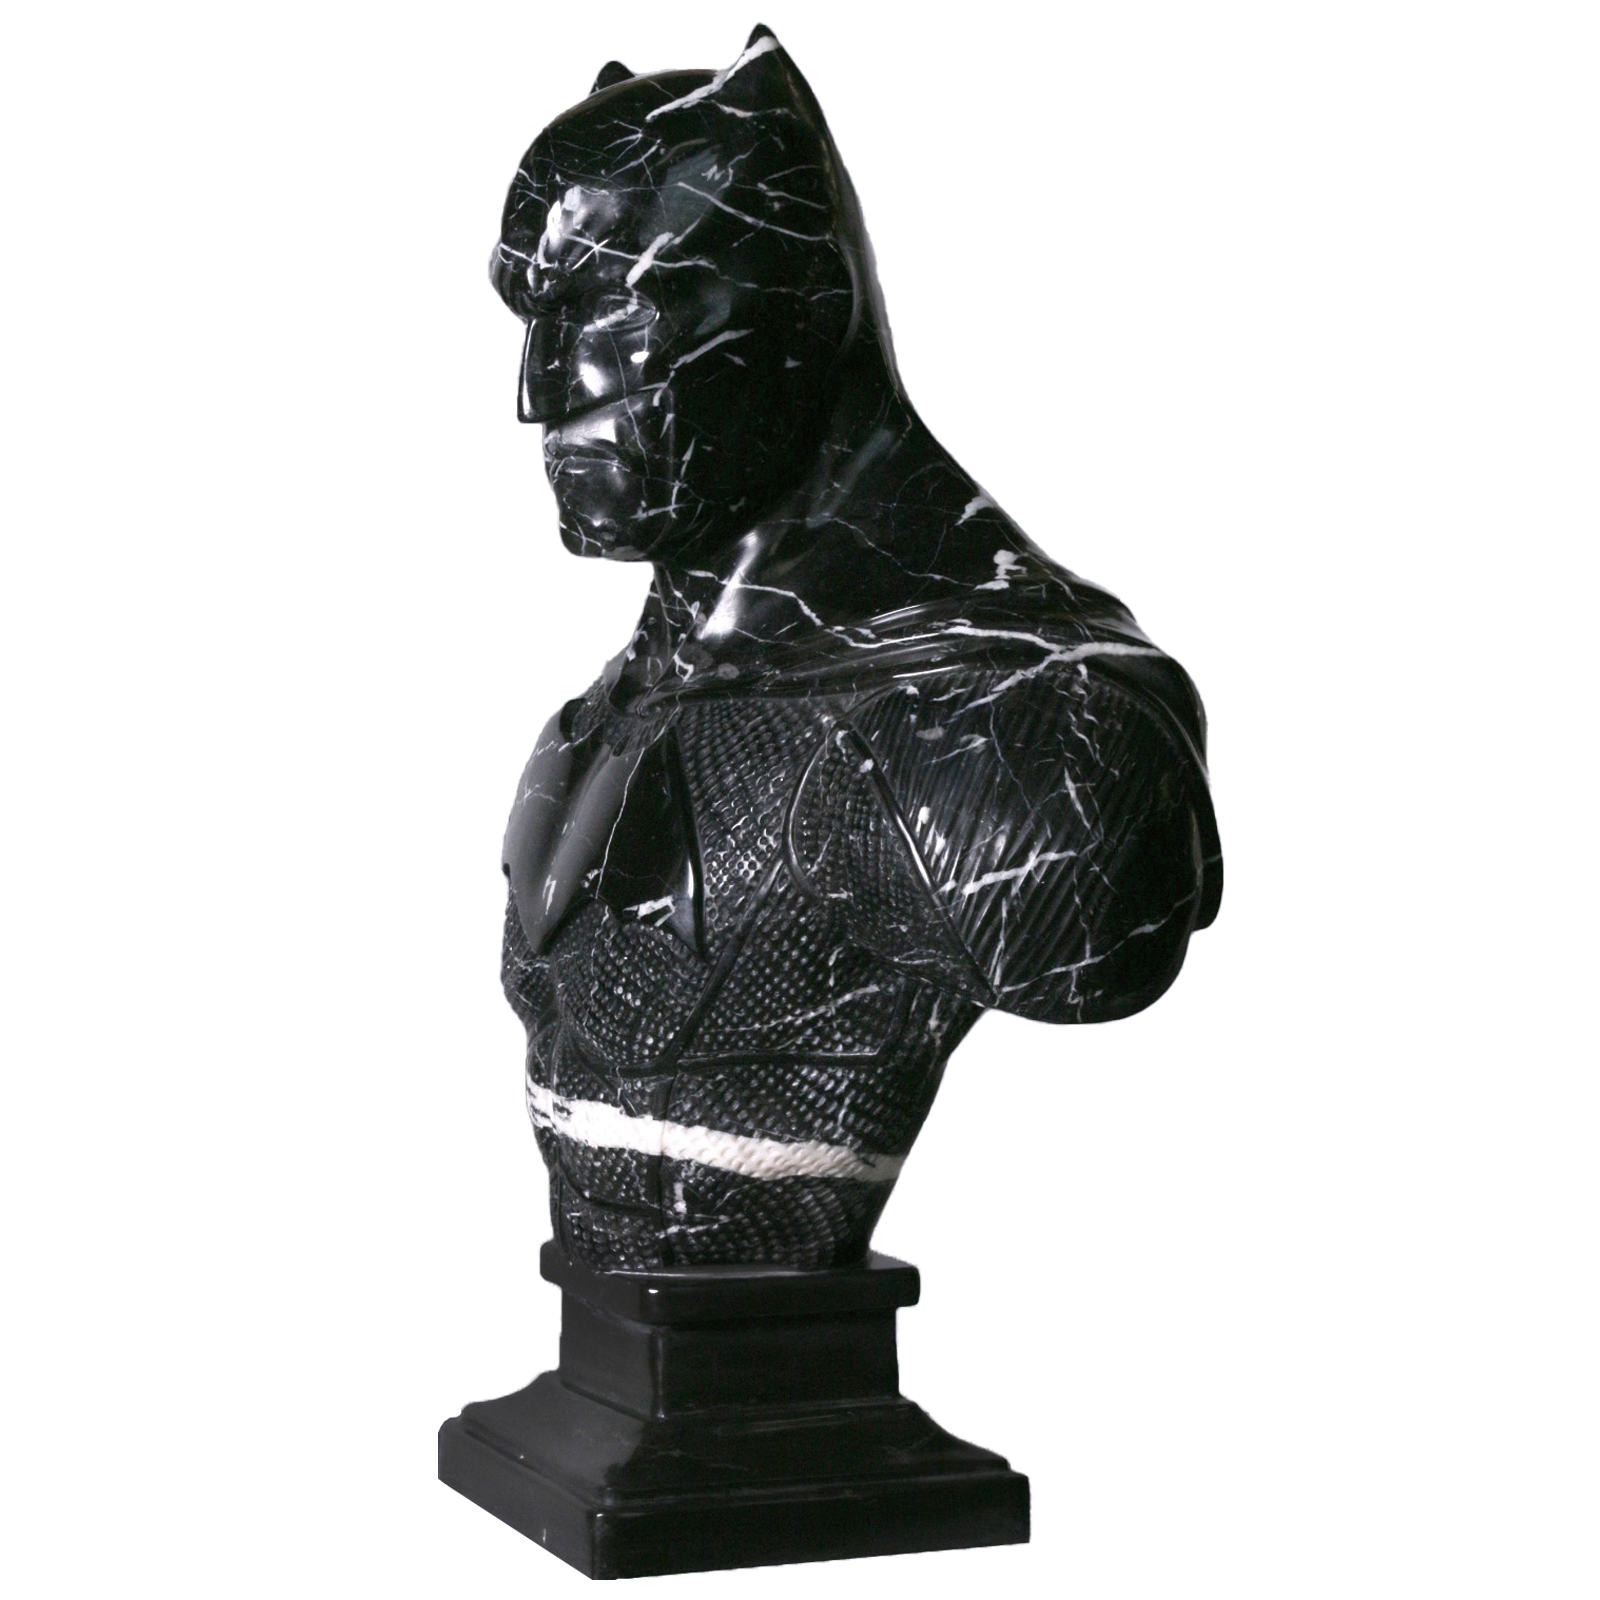 Picture of a black Portorro marble sculpture of Batman, by French artist Leo Caillard, represented at Galerie Montmartre, Paris, France